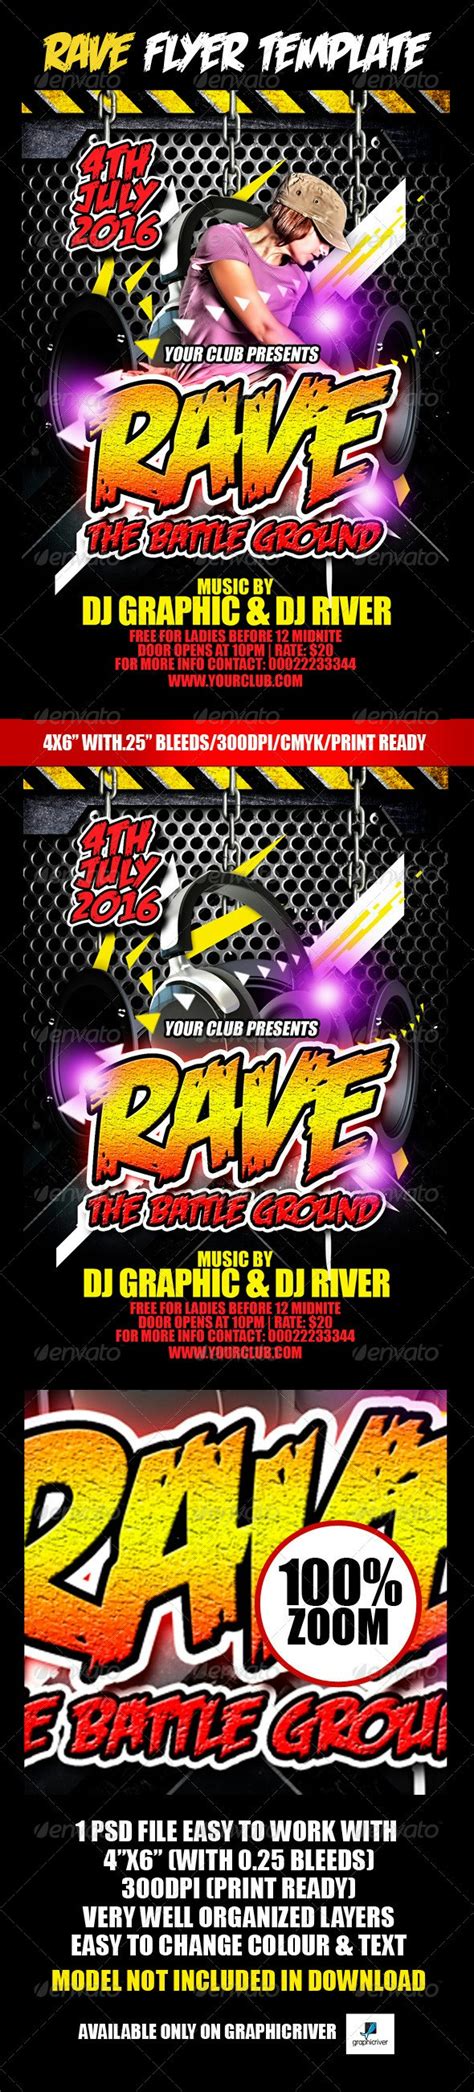 Rave Flyer Template By Crabsta52 Graphicriver